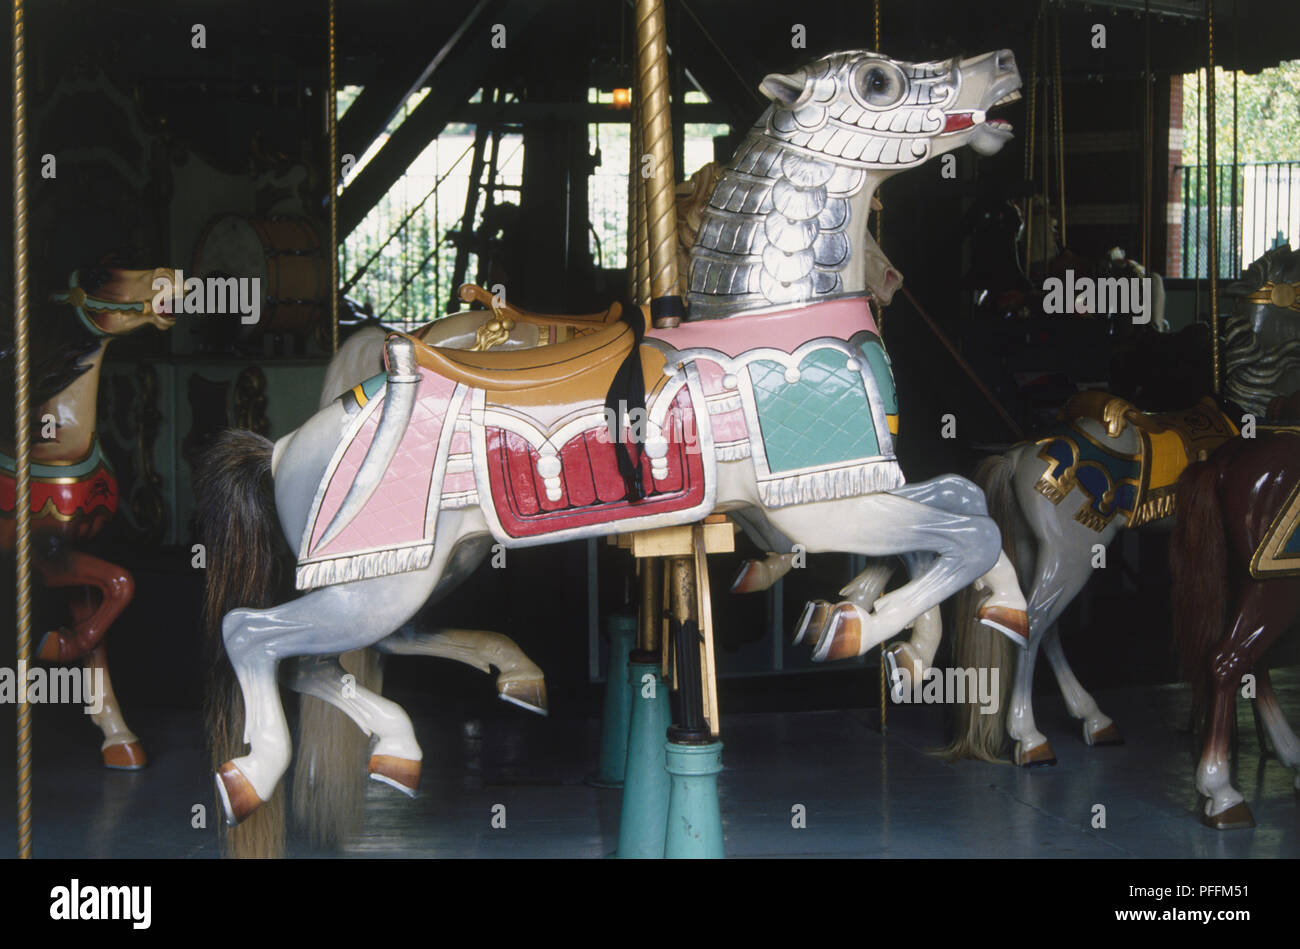 USA, New York, Brooklyn, Prospect Park, painted carousel horse, close up. Stock Photo